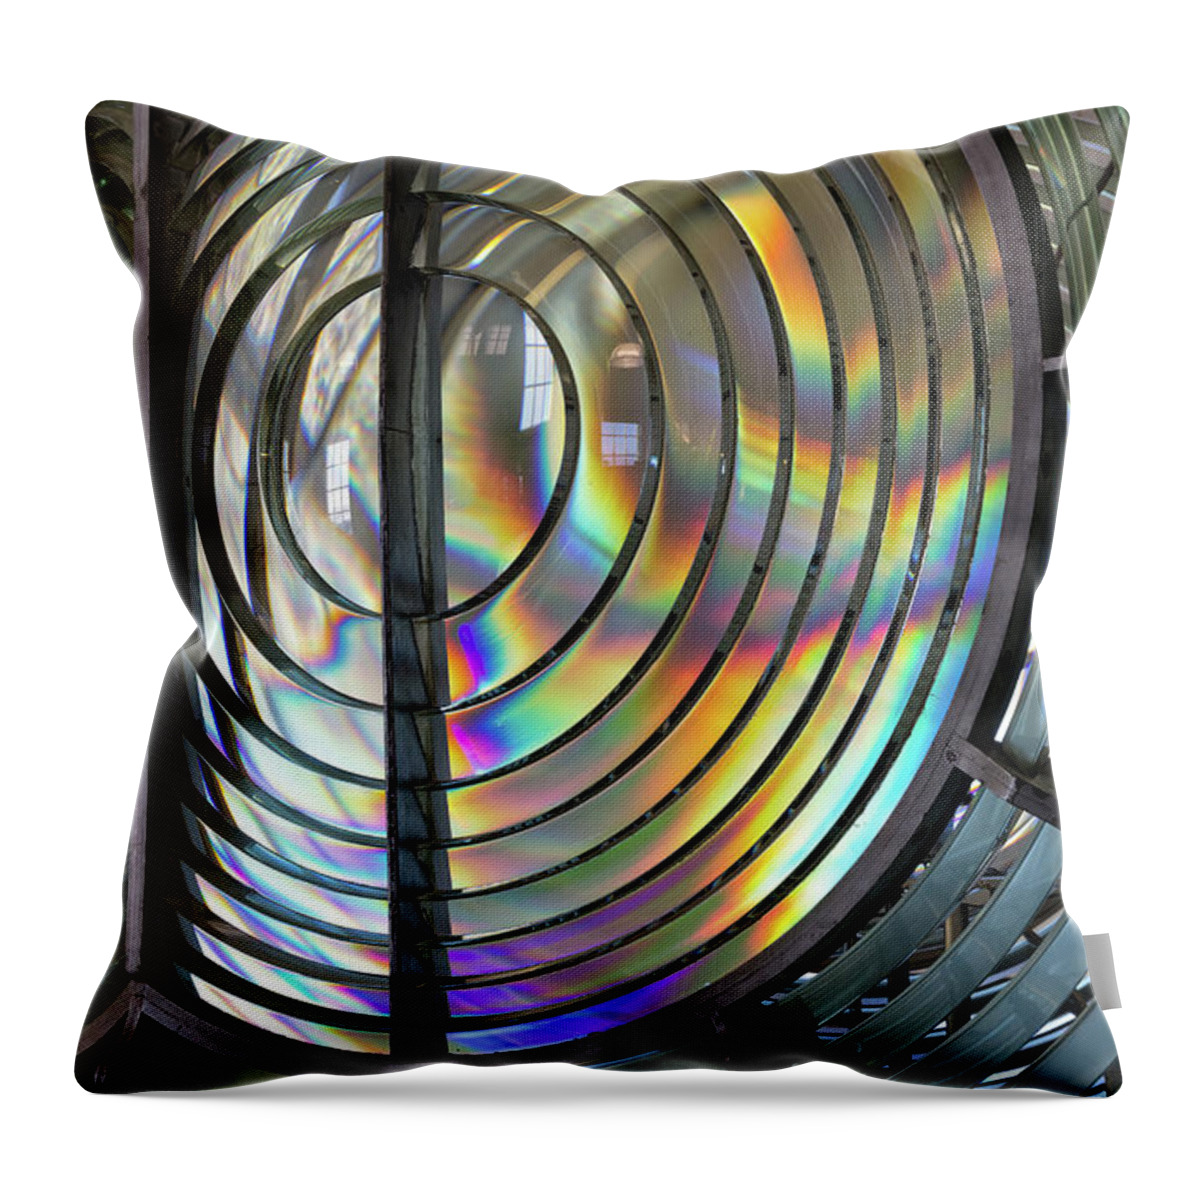 Fresnel Lens Throw Pillow featuring the photograph Point Arena Lighthouse Fresnel Lens Rainbow Abstract by Kathleen Bishop